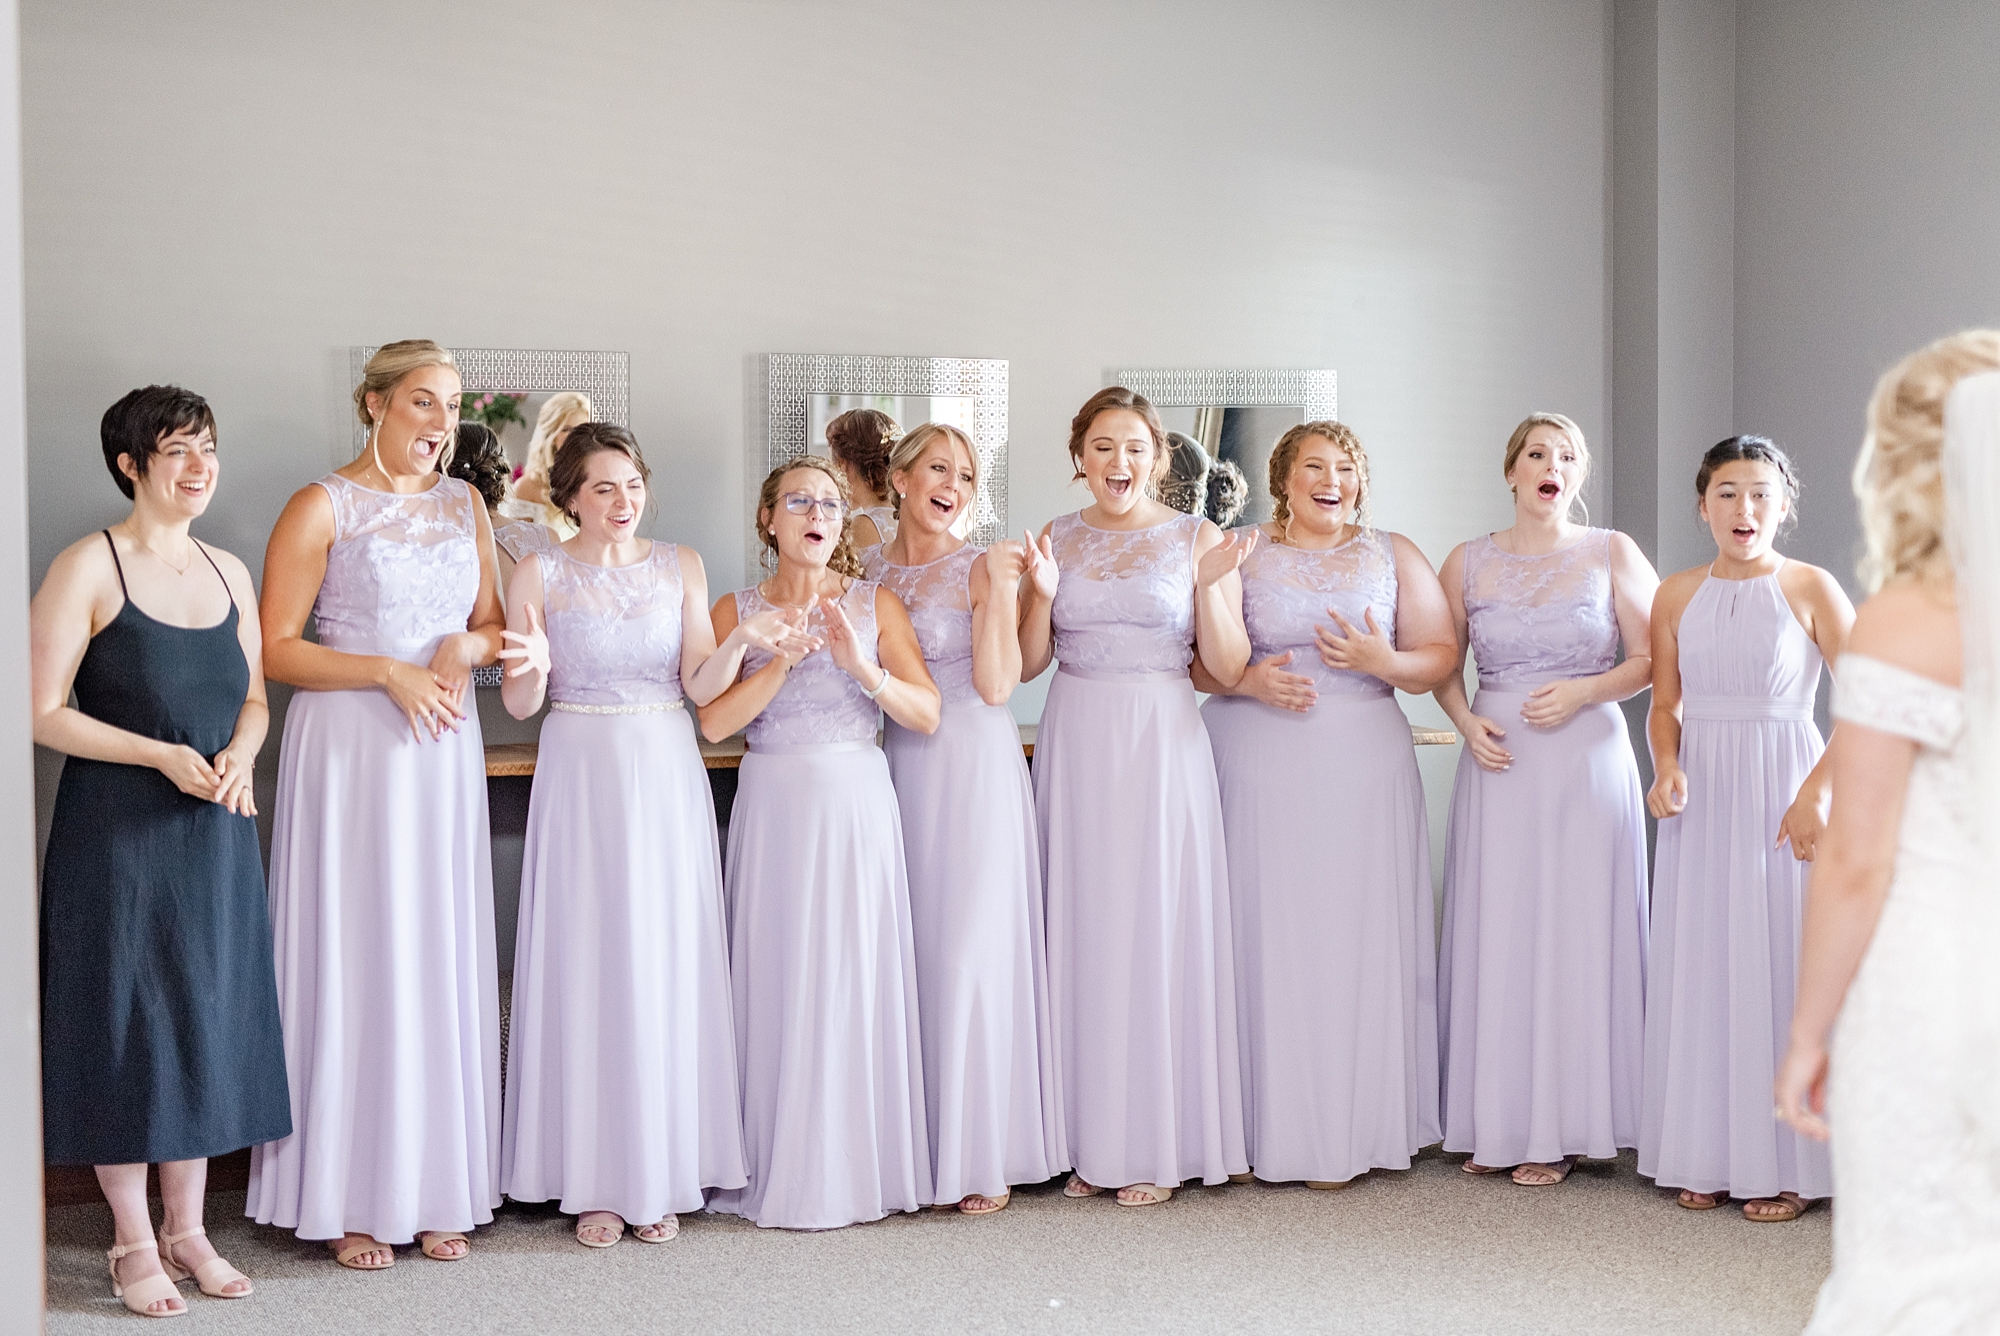 bridesmaids react to seeing bride in gown and veil for the first time